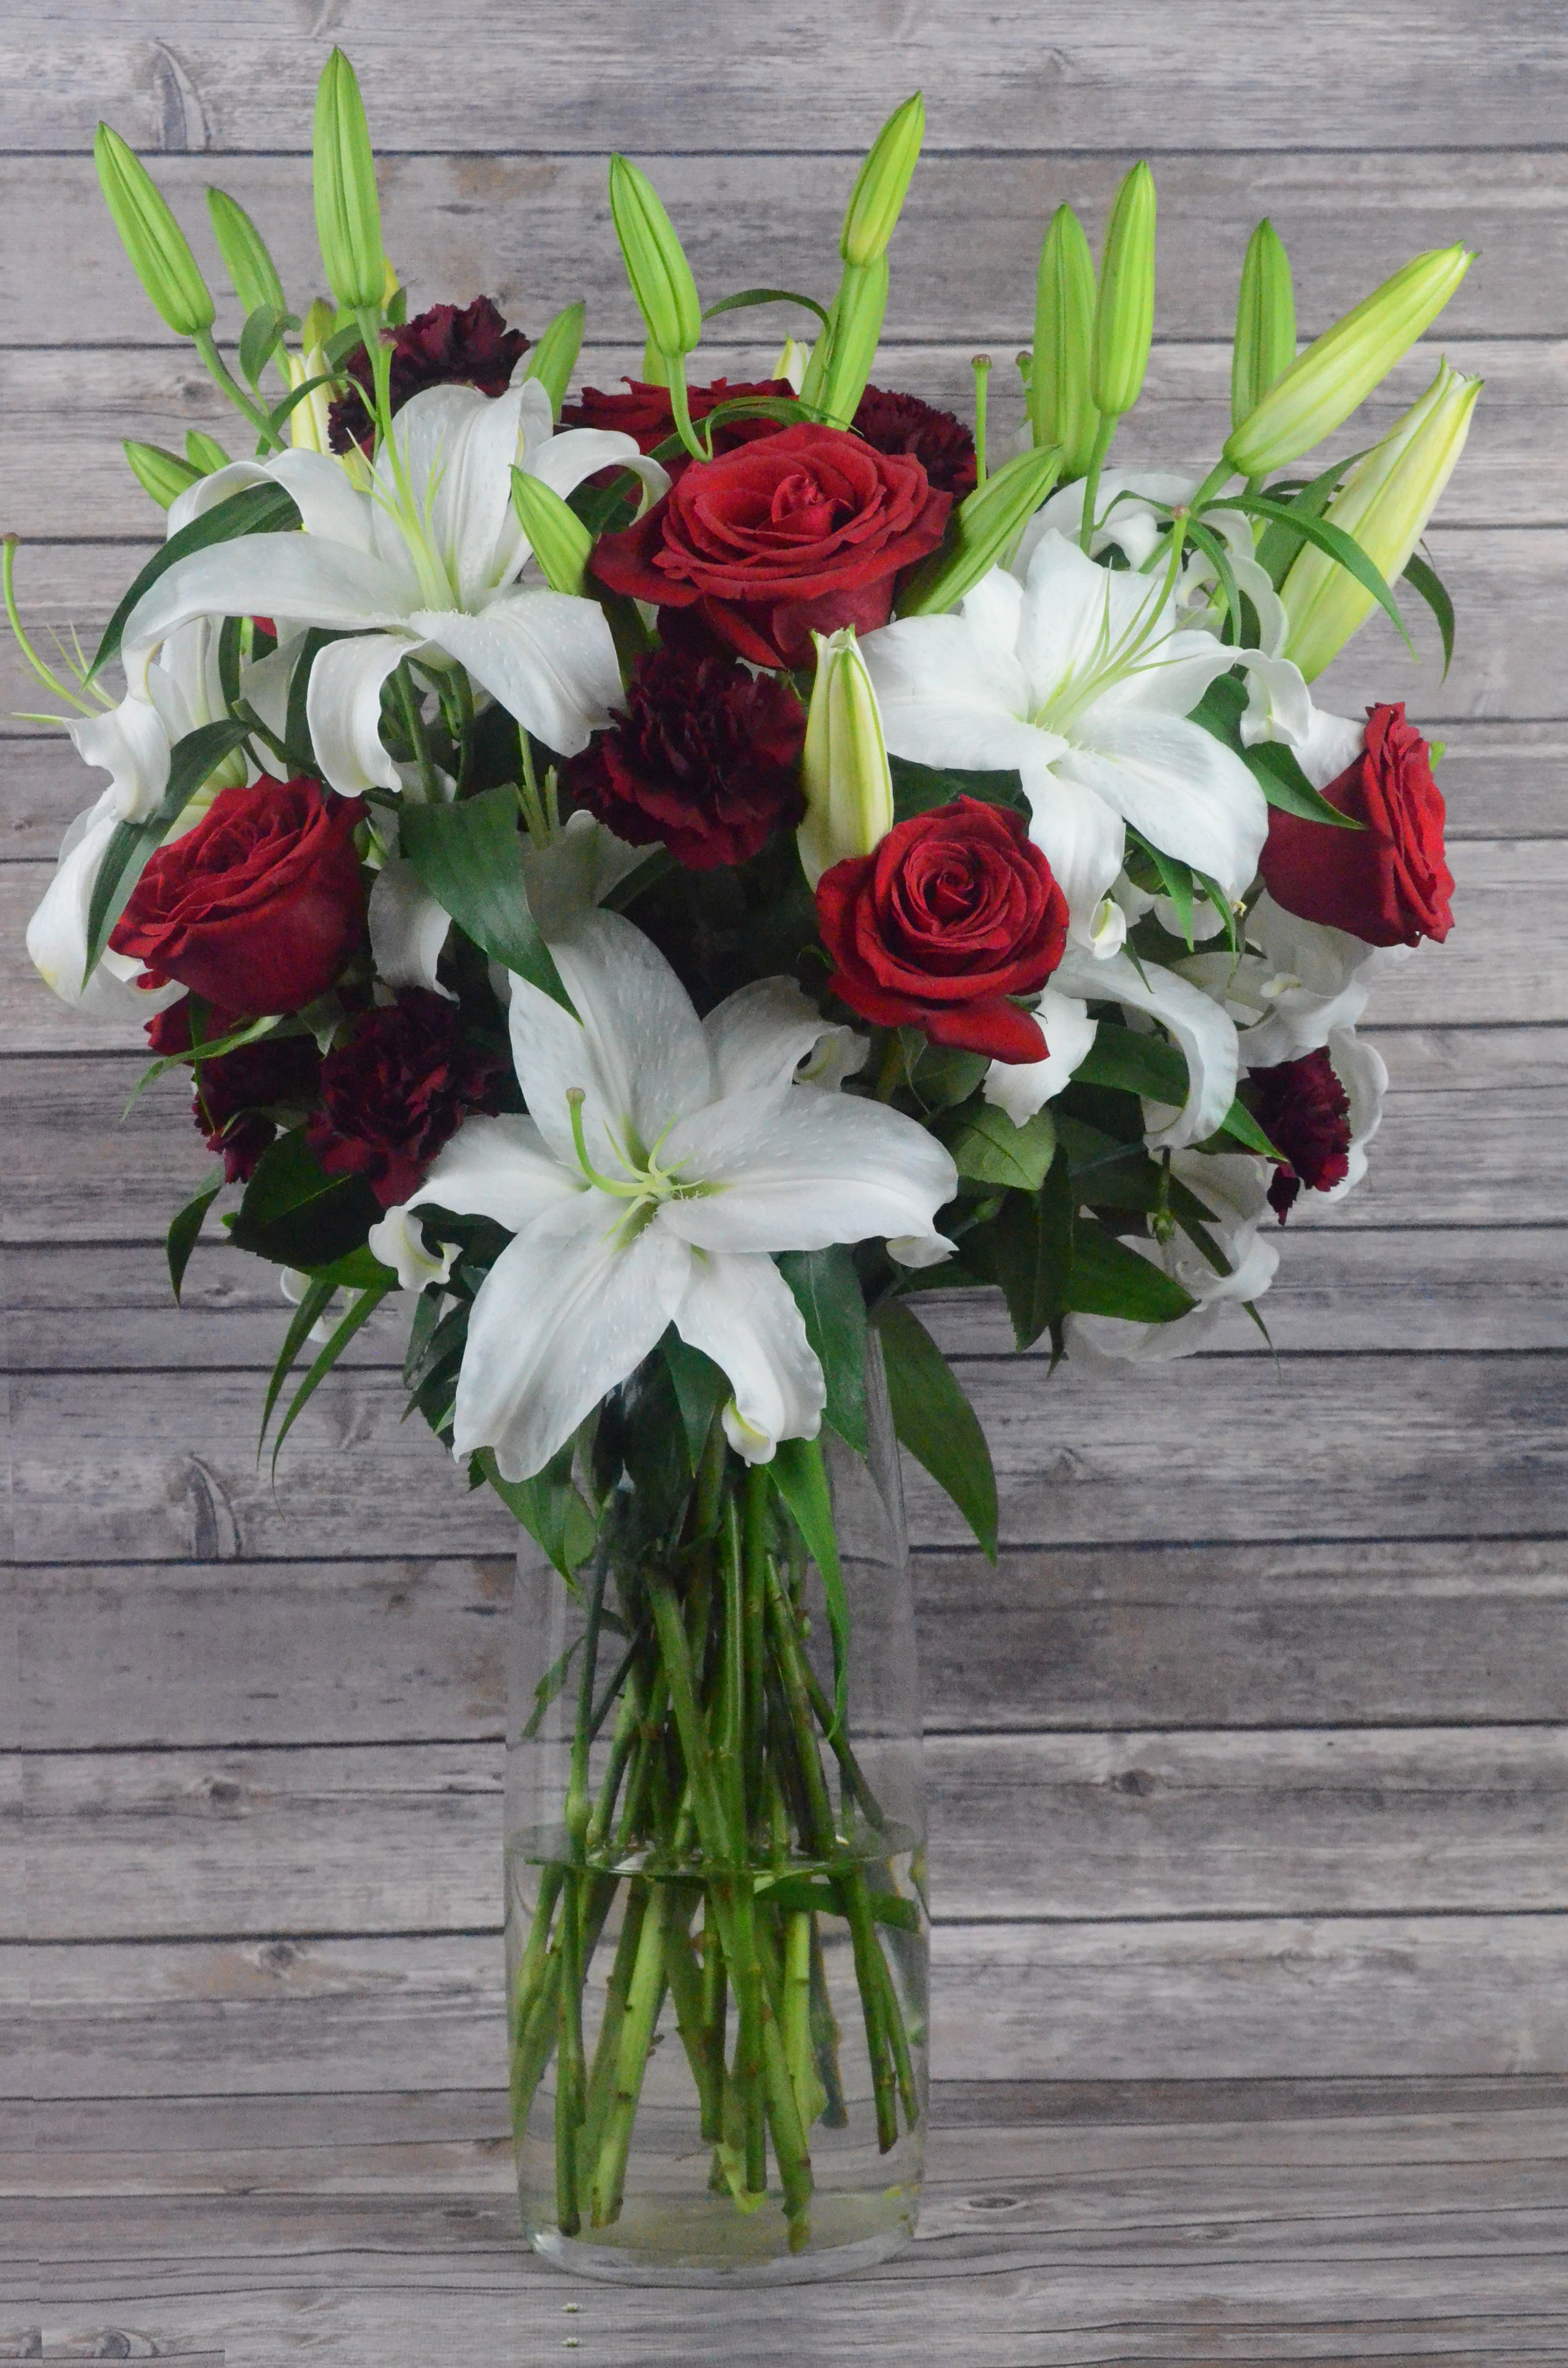 Majestic Love - This assortment of white lilies, red roses and red carnations are the way to get your point across in a big way.  All bouquets are arranged by our professional floral design team accented with seasonal filler (i.e. greenery, baby’s breath, etc.) inside an elegant glass vase or gift box. Blooms are hand delivered in person to enhance any celebration or a “just because” surprise. When artistically designed in a clear glass vase arrangement measures approximately 23&quot;H x 18&quot;L.